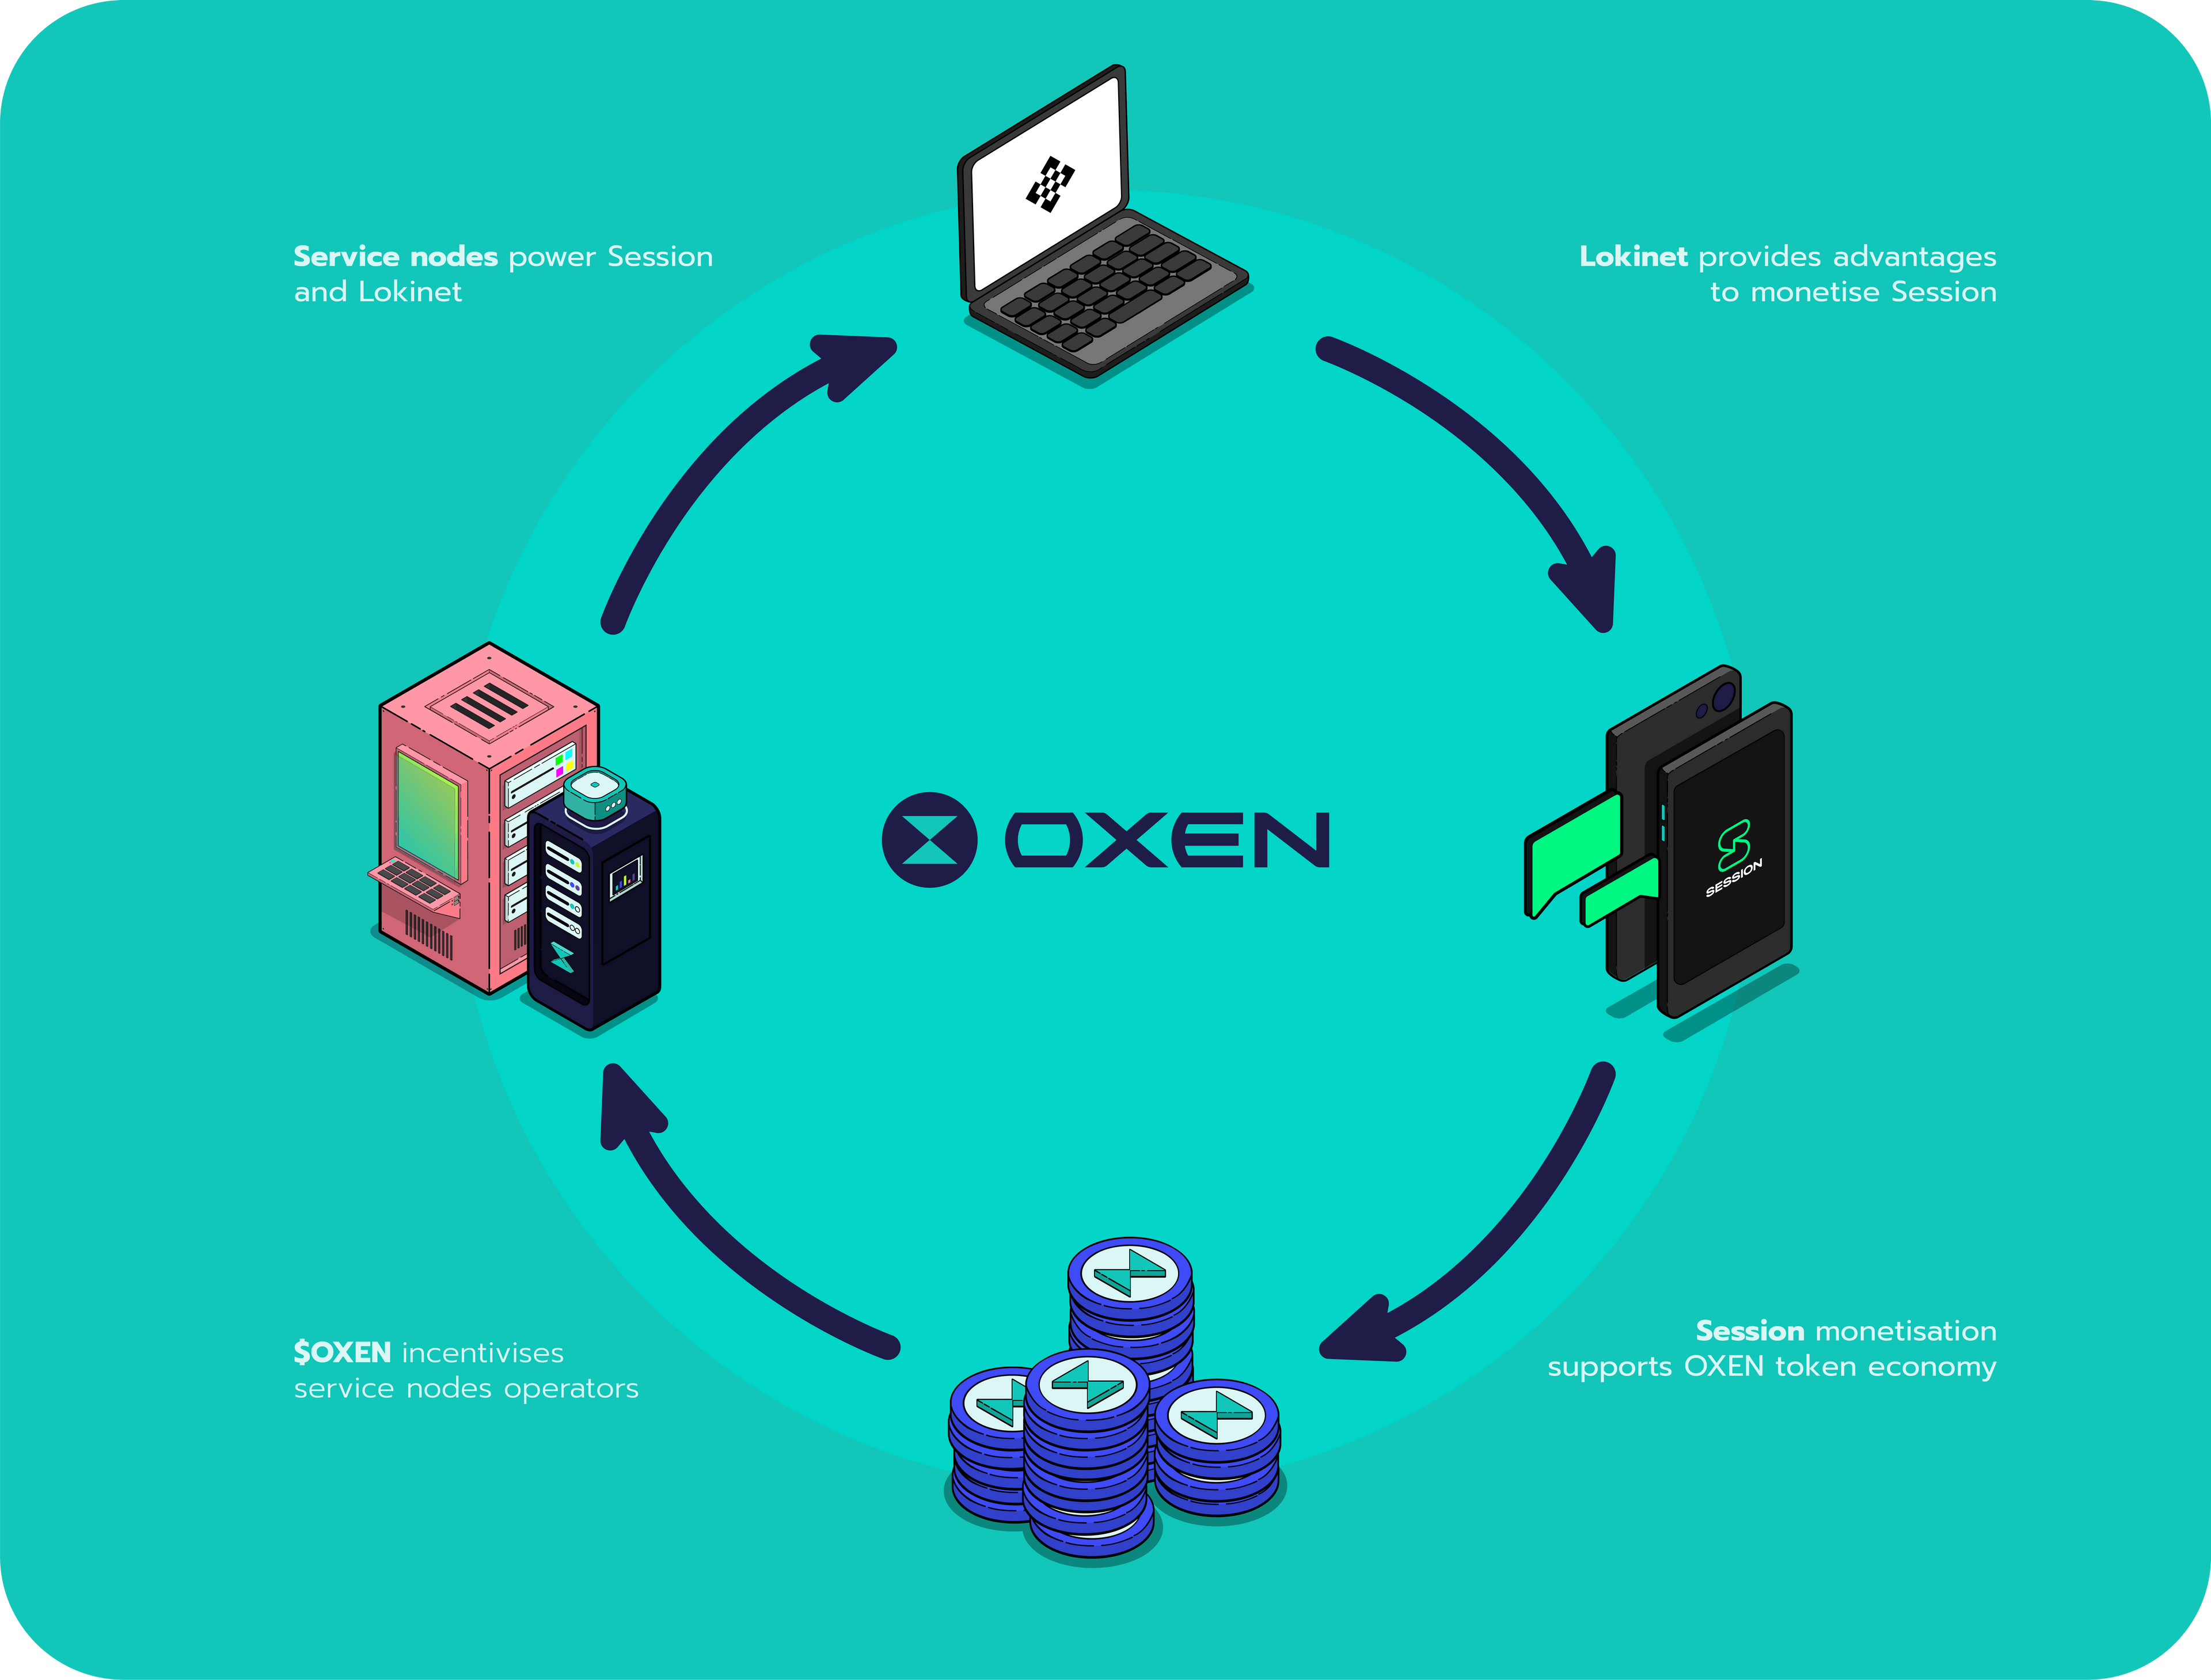 The Oxen ecosystem